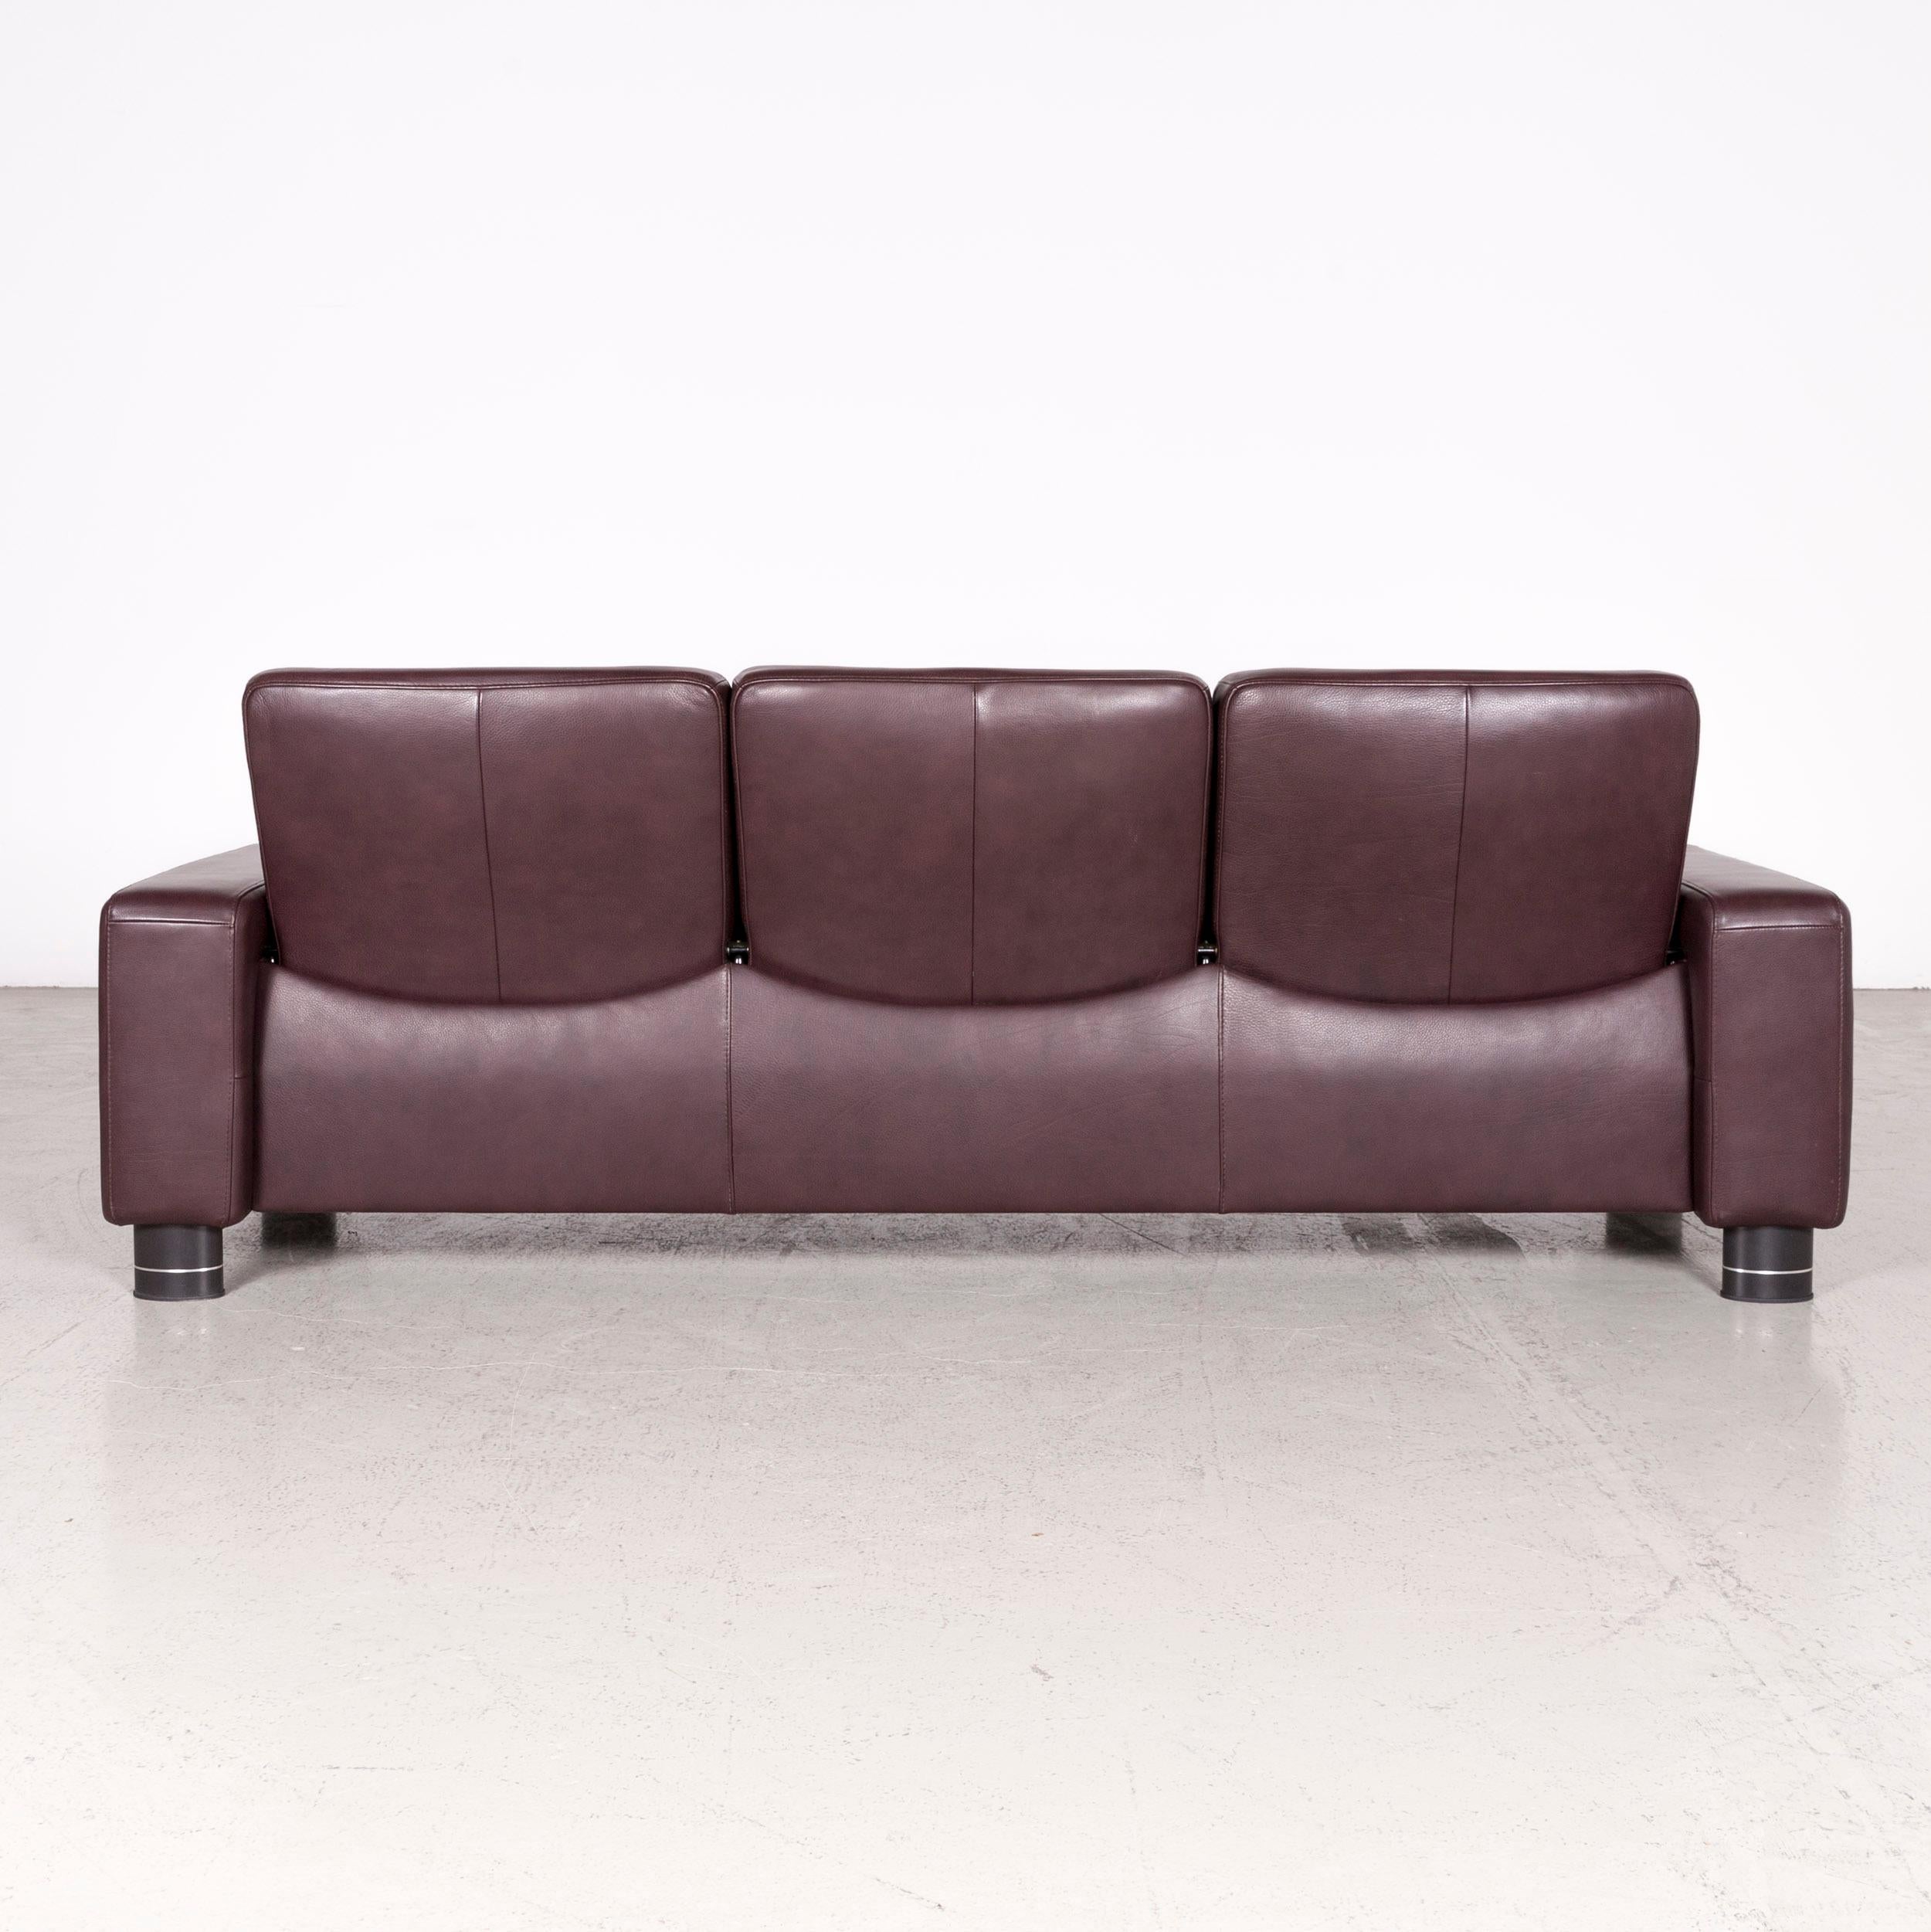 Stressless Jazz Designer Leather Sofa Eggplant Three-Seat Real Leather Couch 1